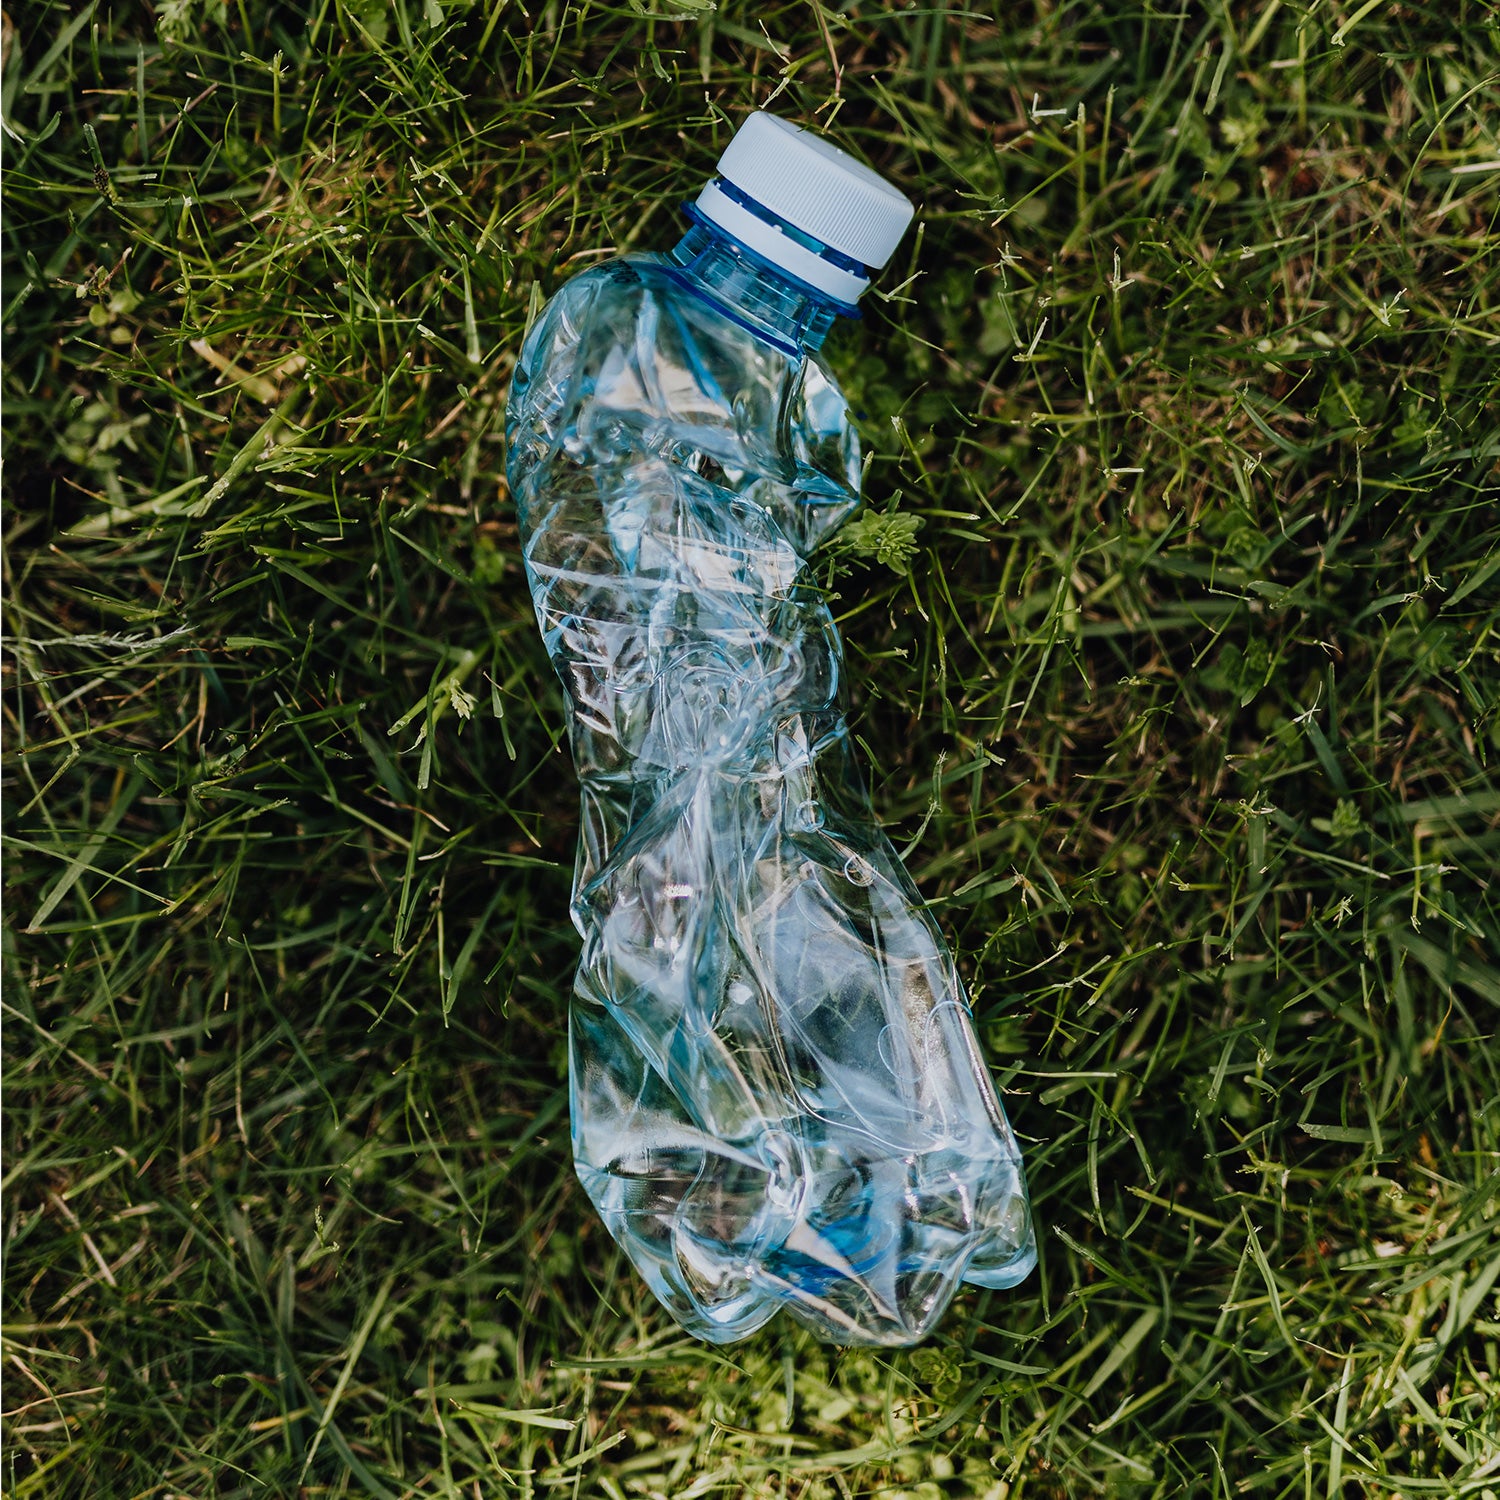 10 Shocking Ways Plastic Harms the Environment